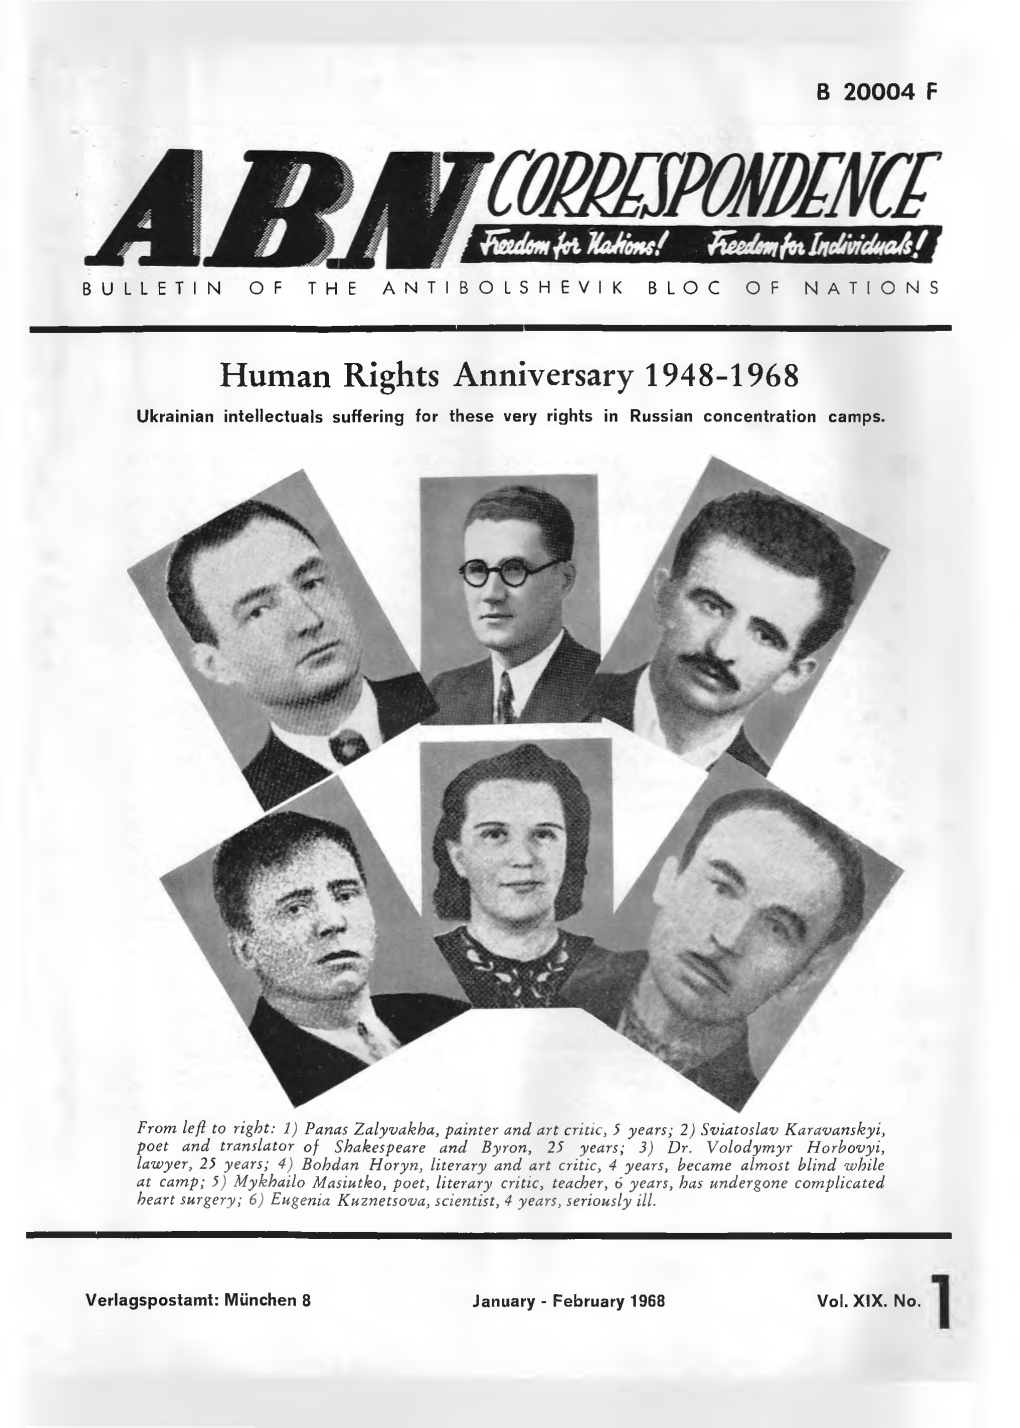 Human Rights Anniversary 1948-1968 Ukrainian Intellectuals Suffering for These Very Rights in Russian Concentration Camps